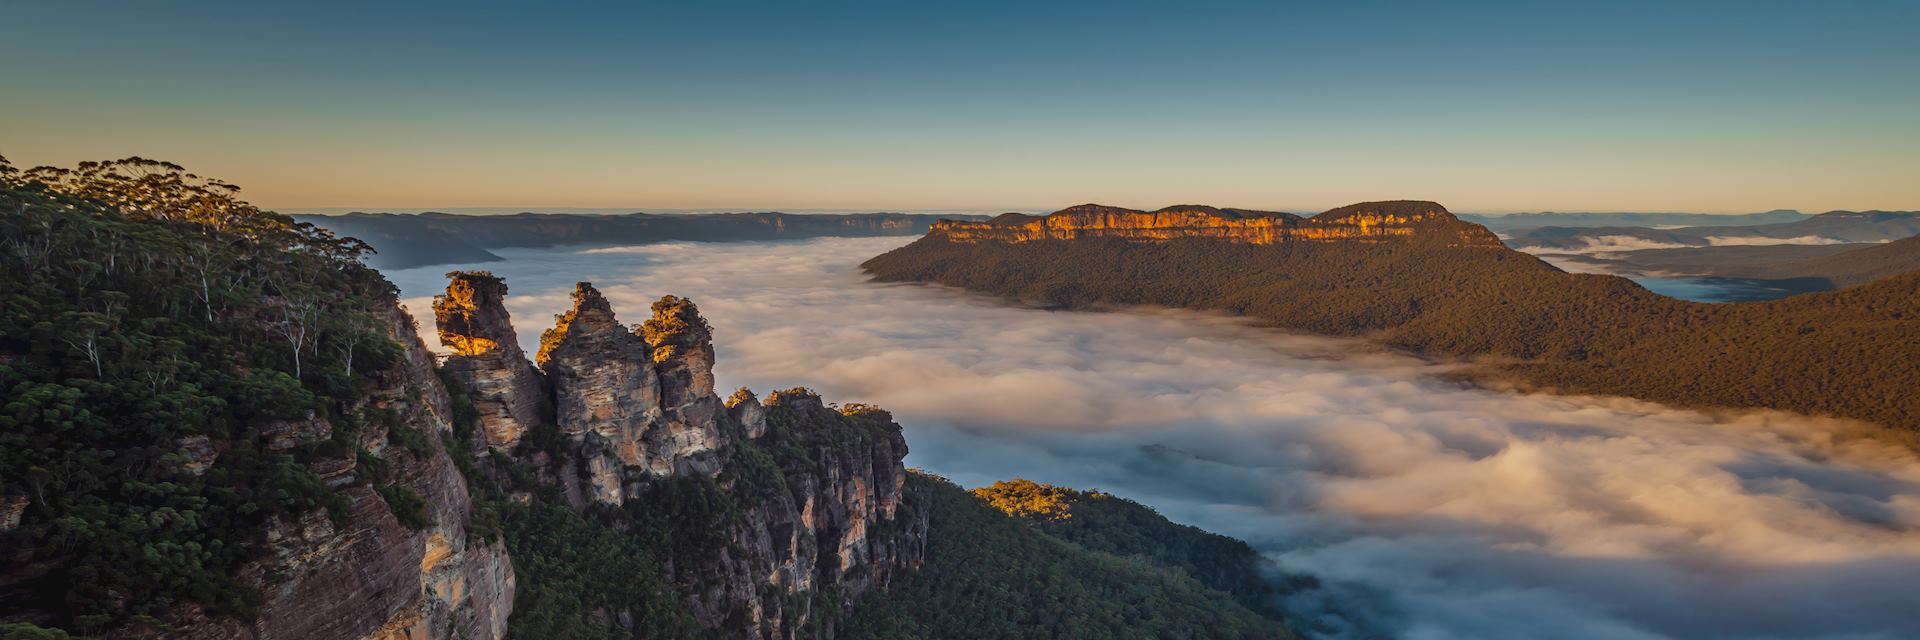 Blue Mountains National Park, New South Wales